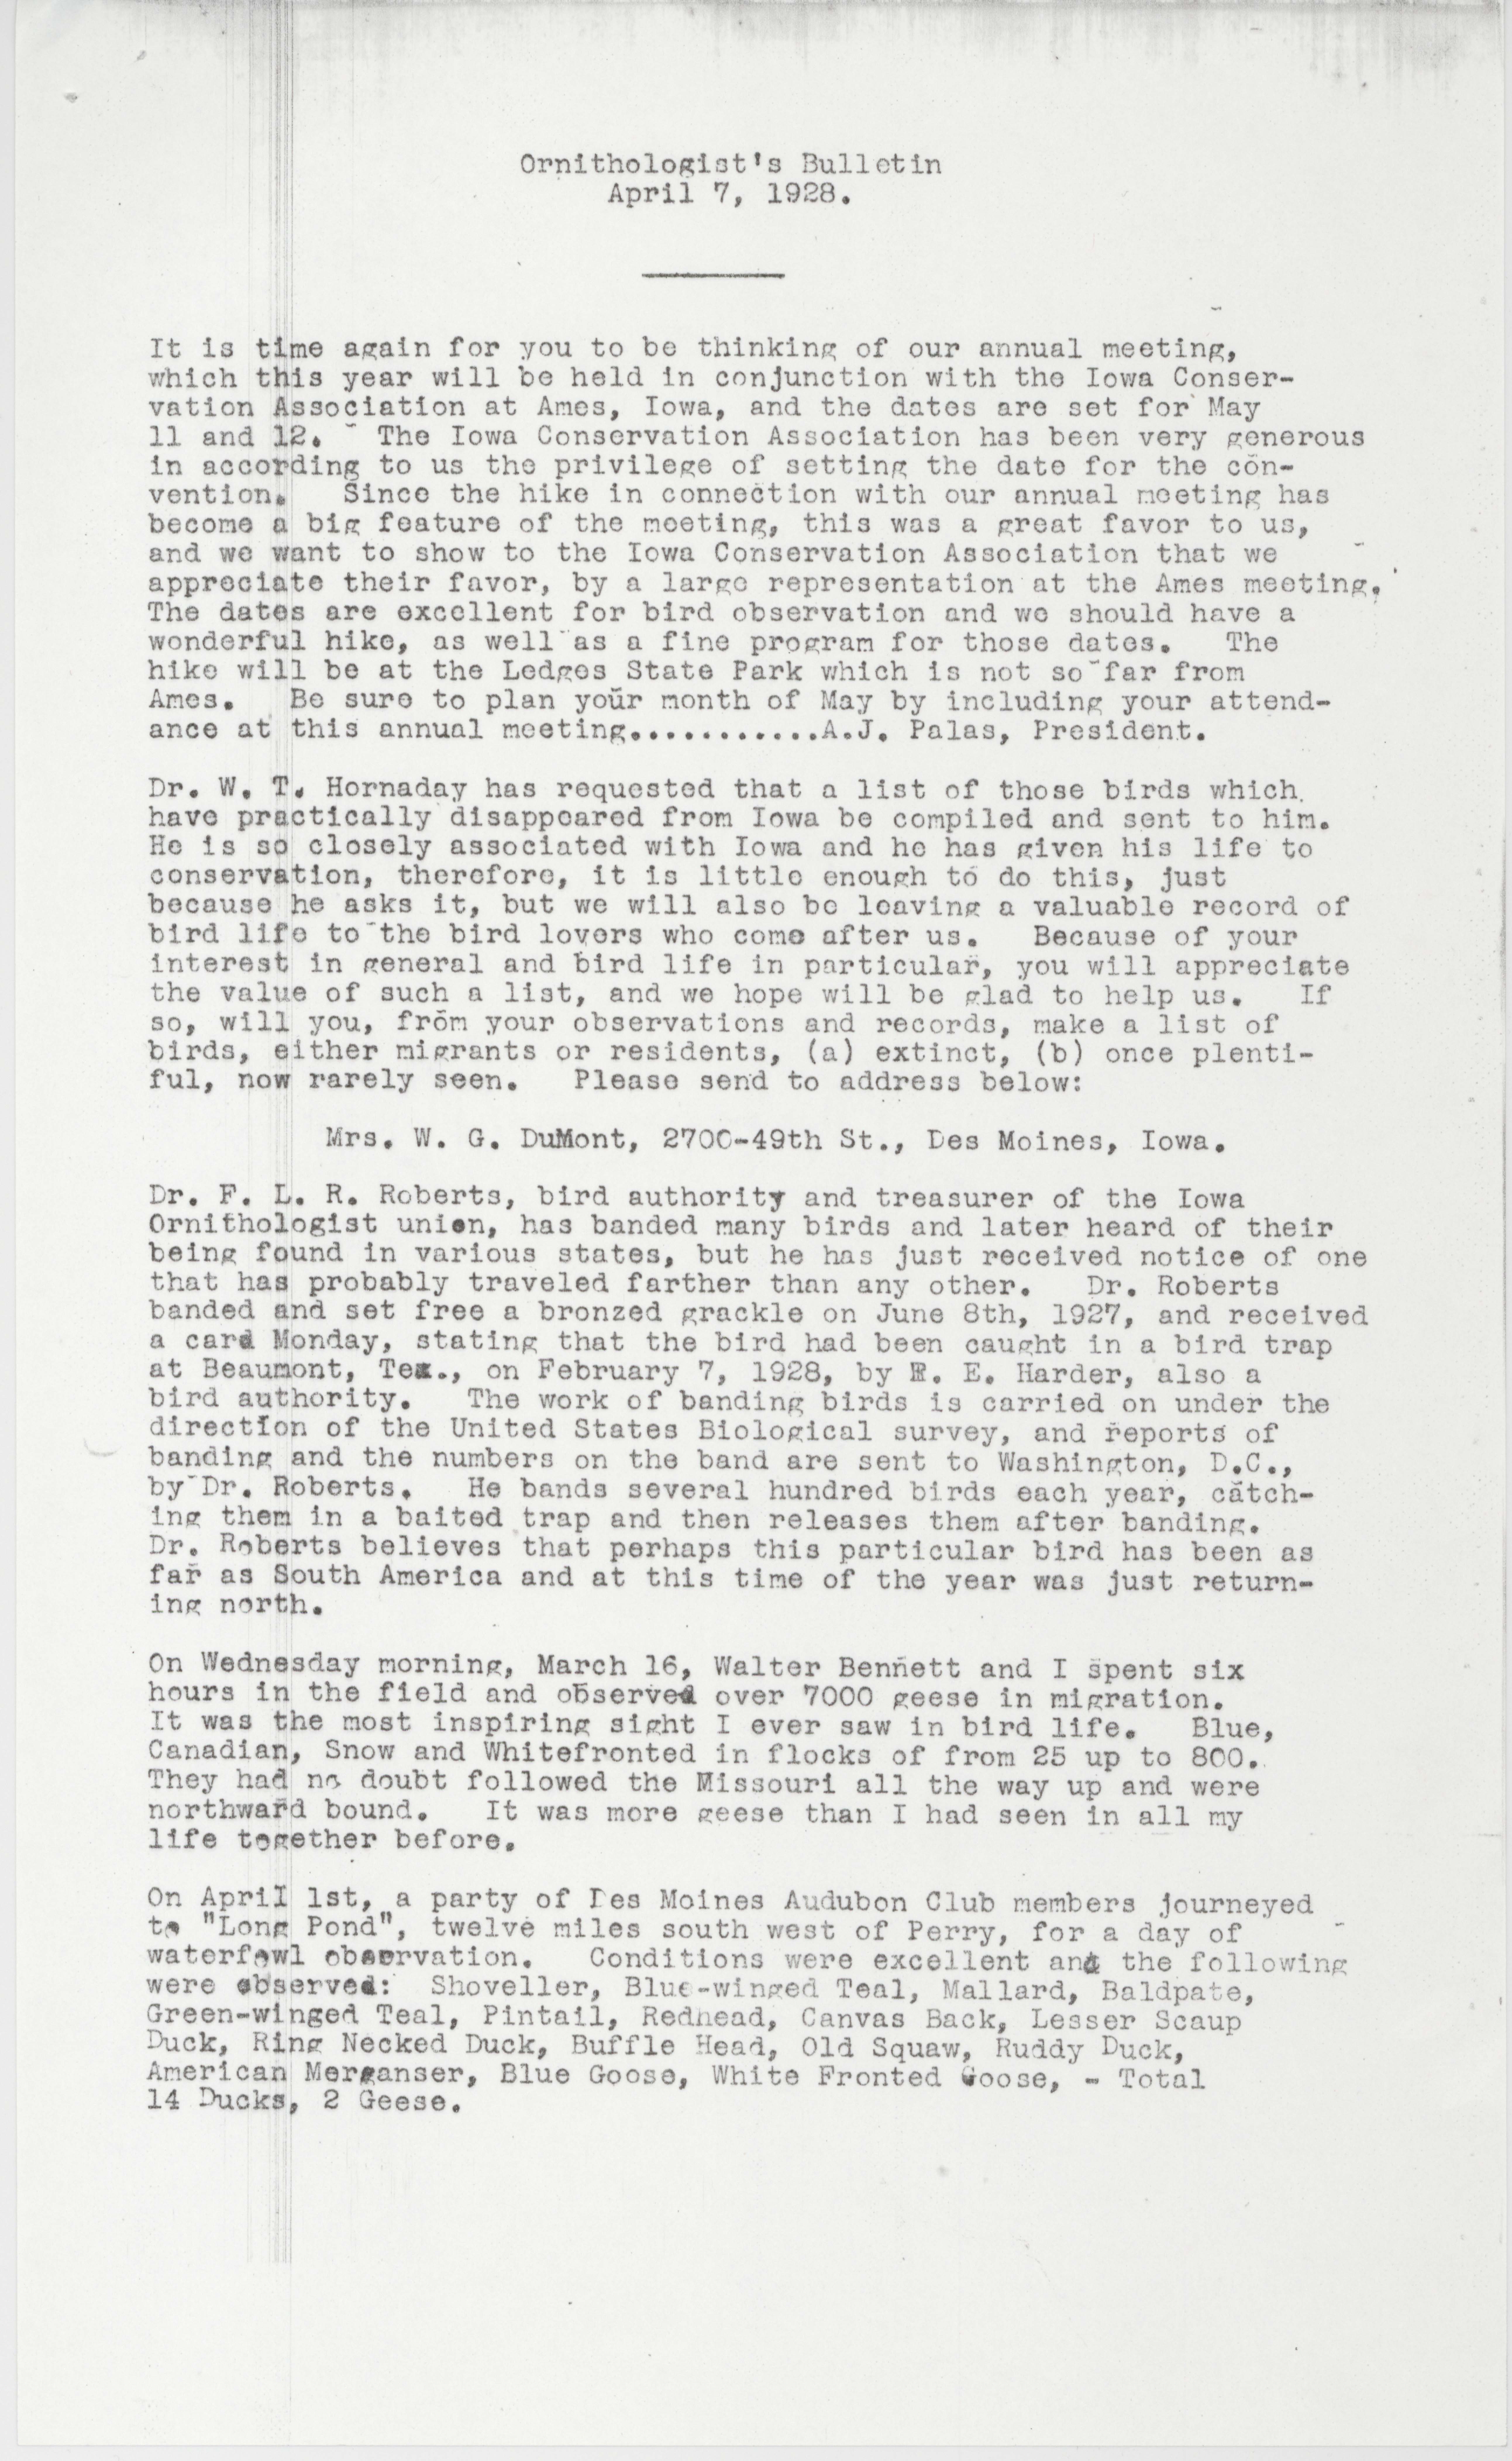 Letter to members of the Iowa Ornithologists' Union regarding the annual meeting, April 7, 1928